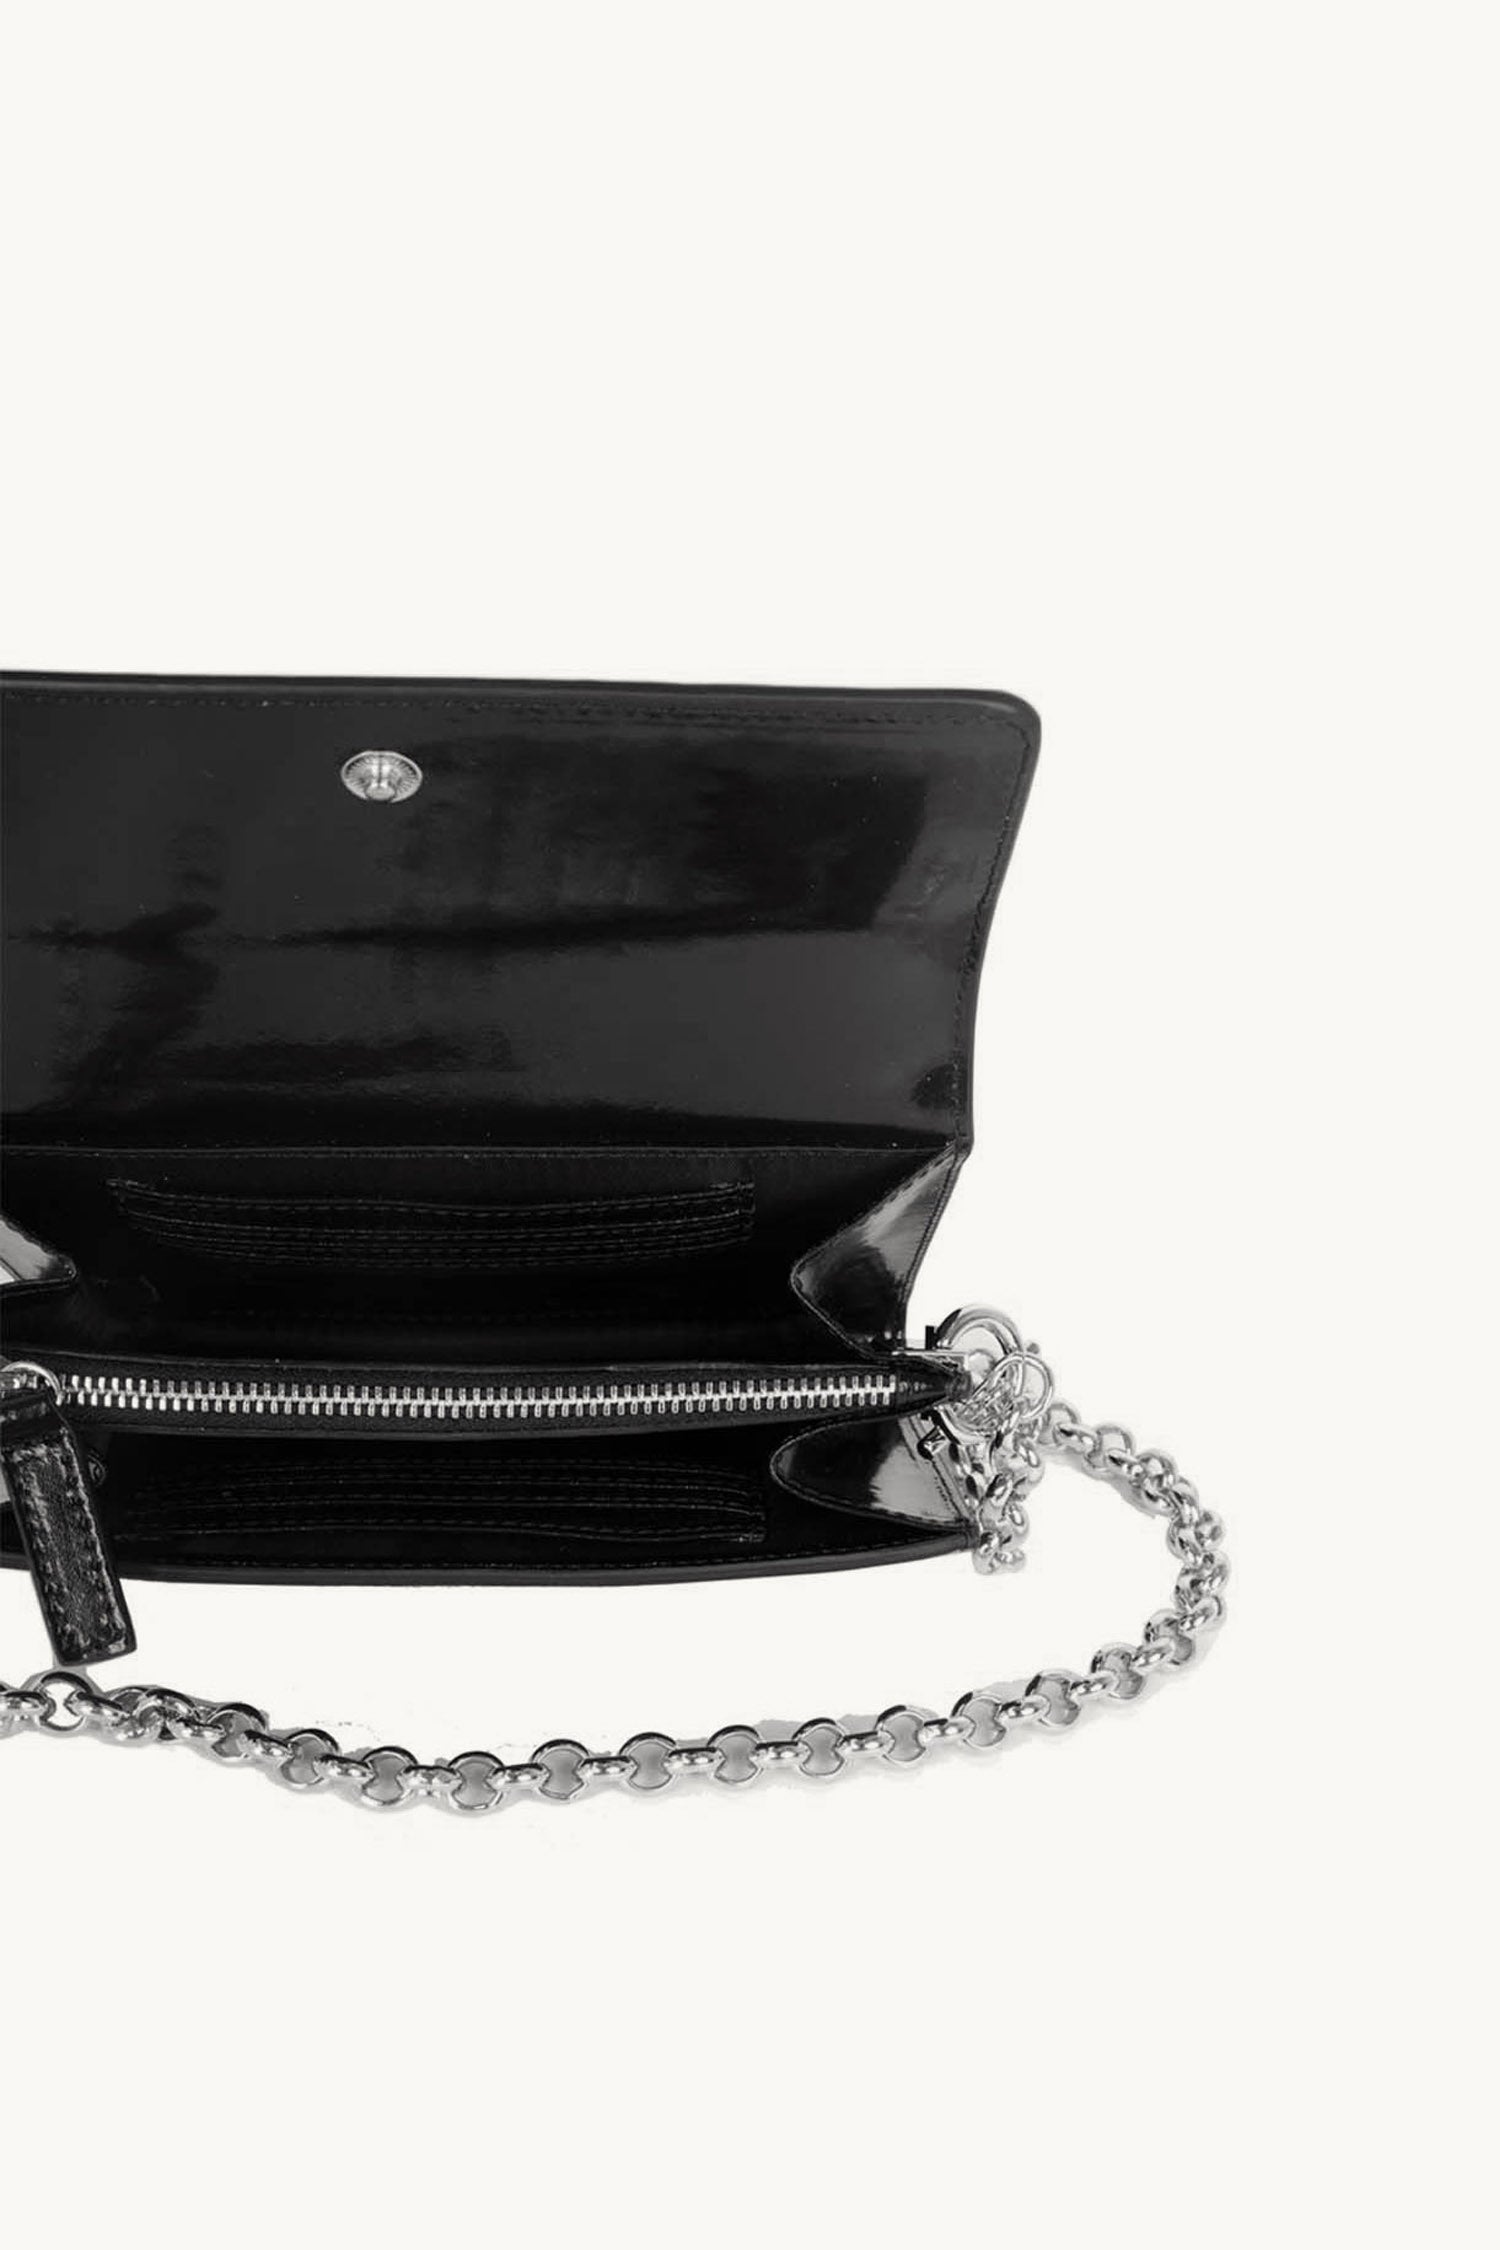 The Juicy Patent Wallet Black Silver – Dylan Kain